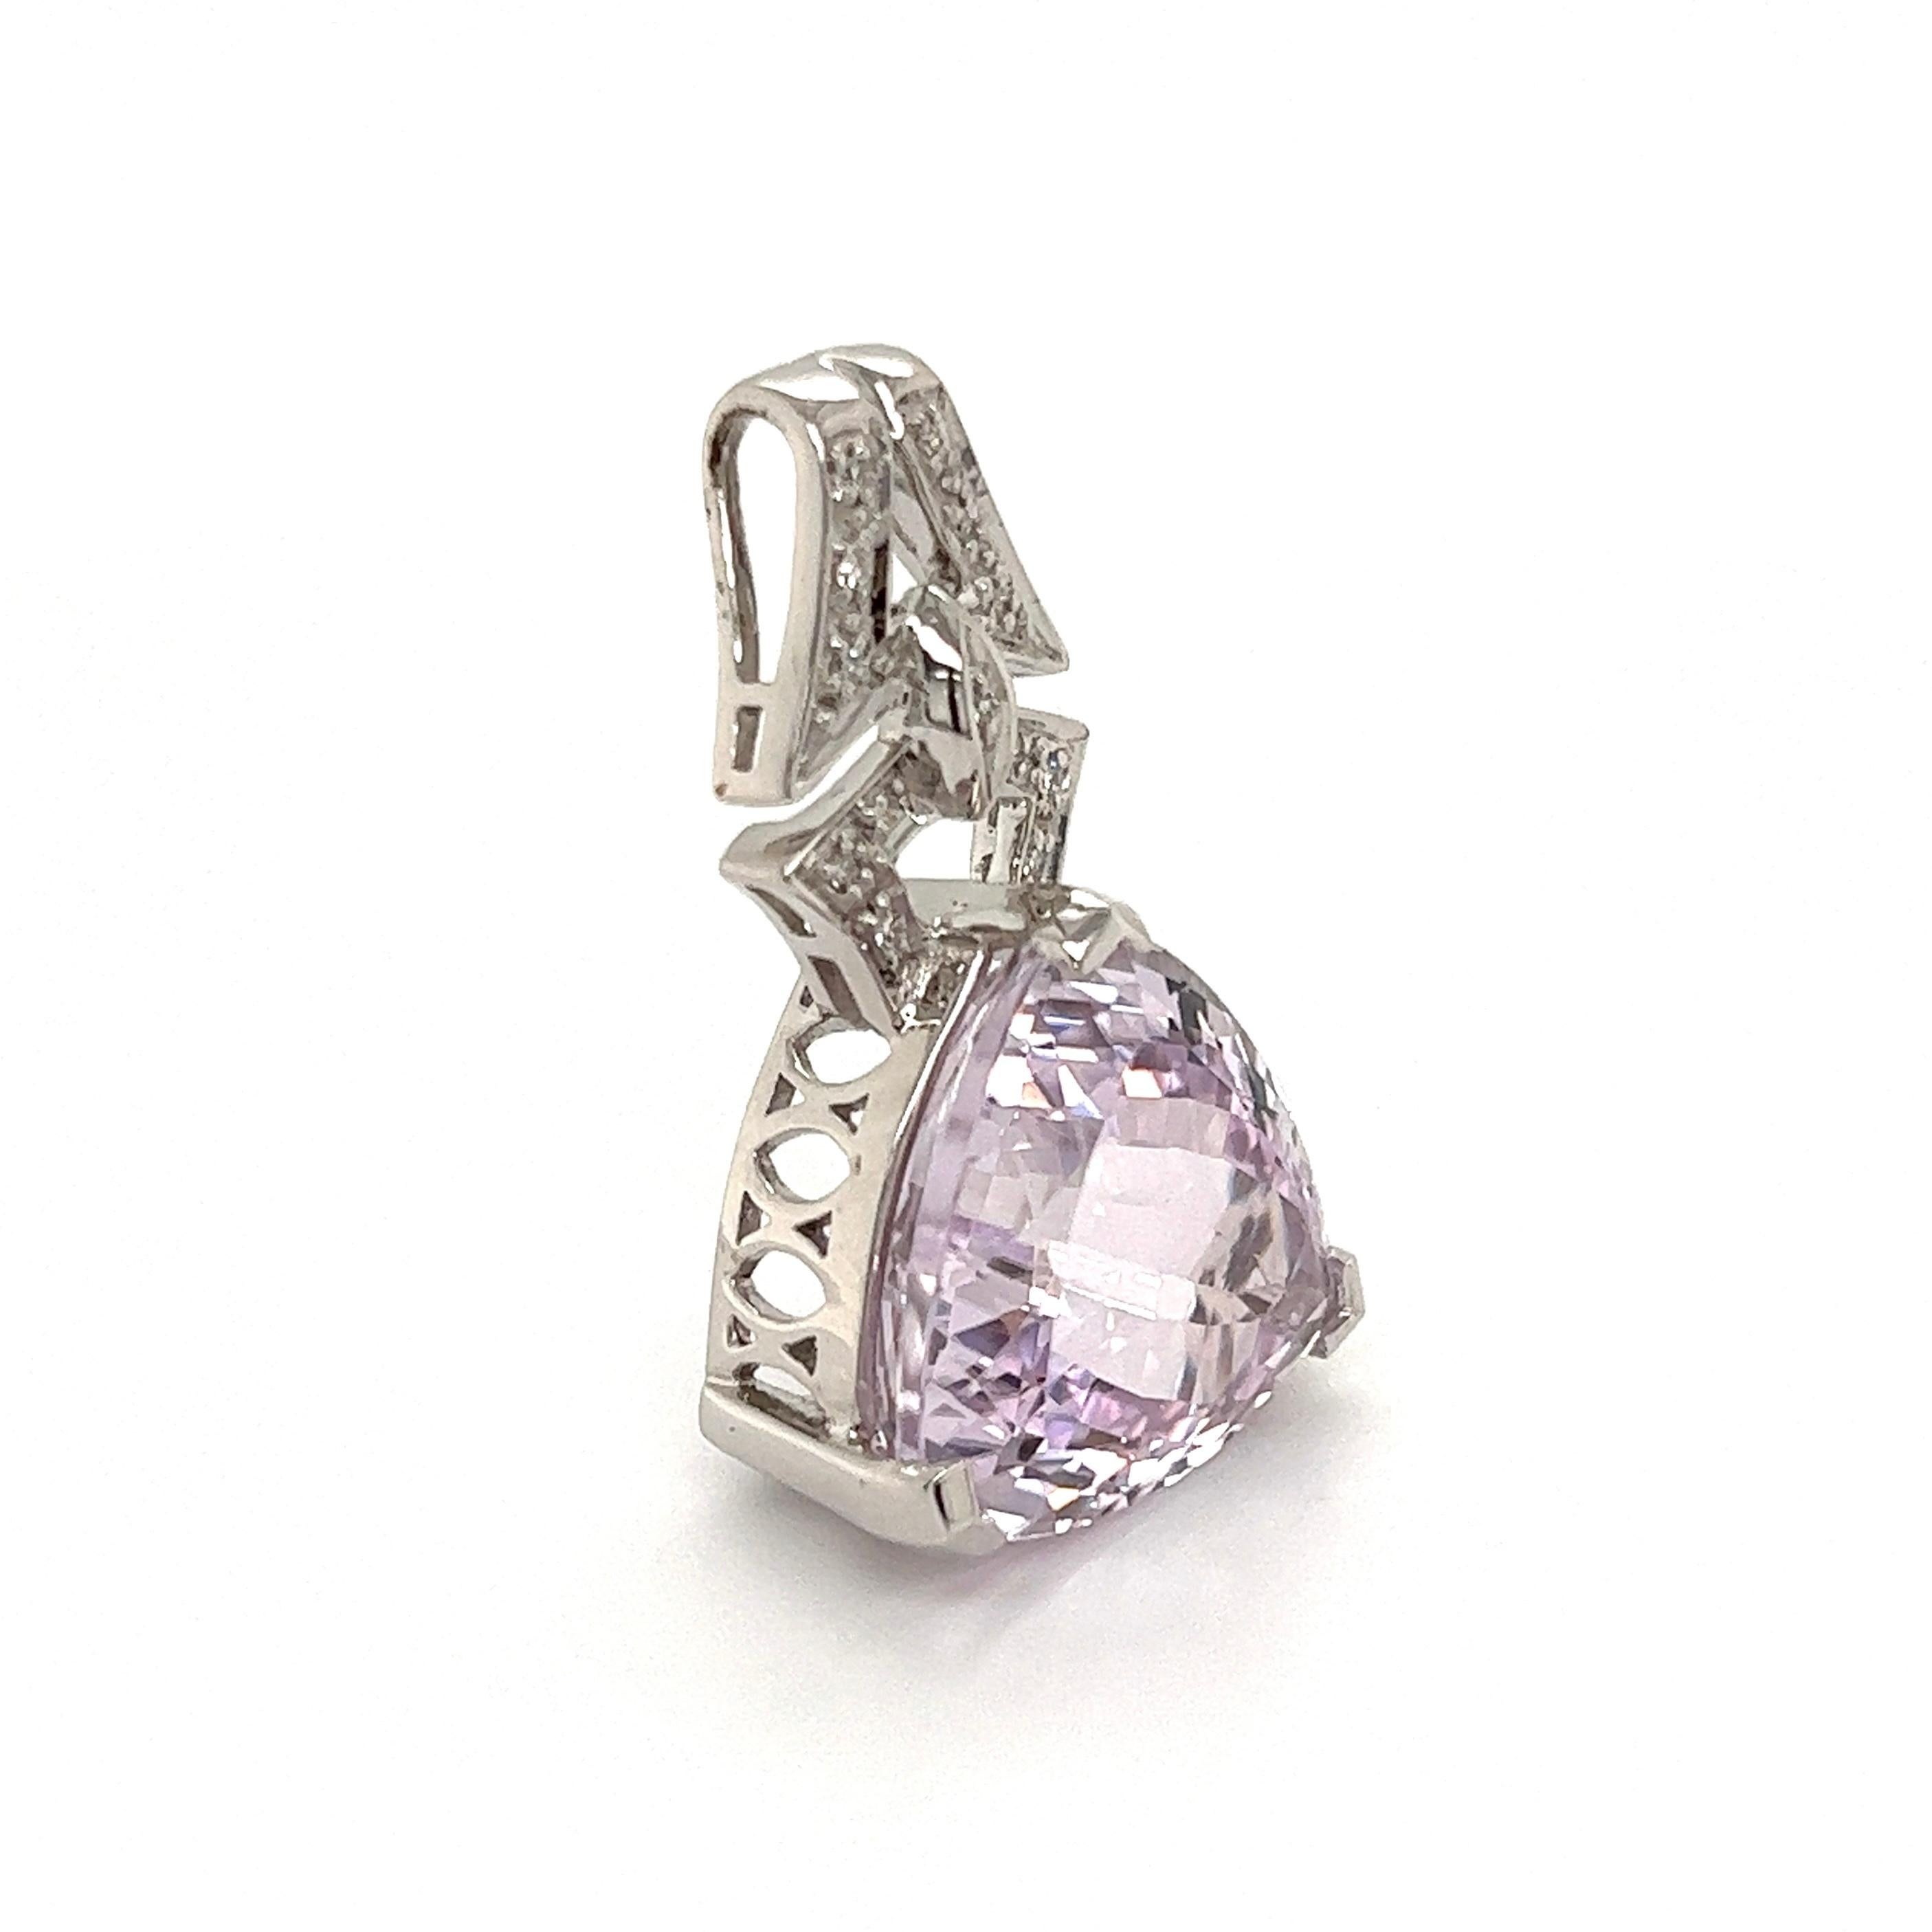 Exquisite 13.5 Carat Trillion Kunzite and Diamond Pendant Necklace. Accented with Diamonds, weighing approx. 0.19tcw. Beautifully Hand crafted 18K White Gold. Measuring approx. 1.25” H x 0.73” W. More Beautiful in real time! Chic and Timeless…Sure